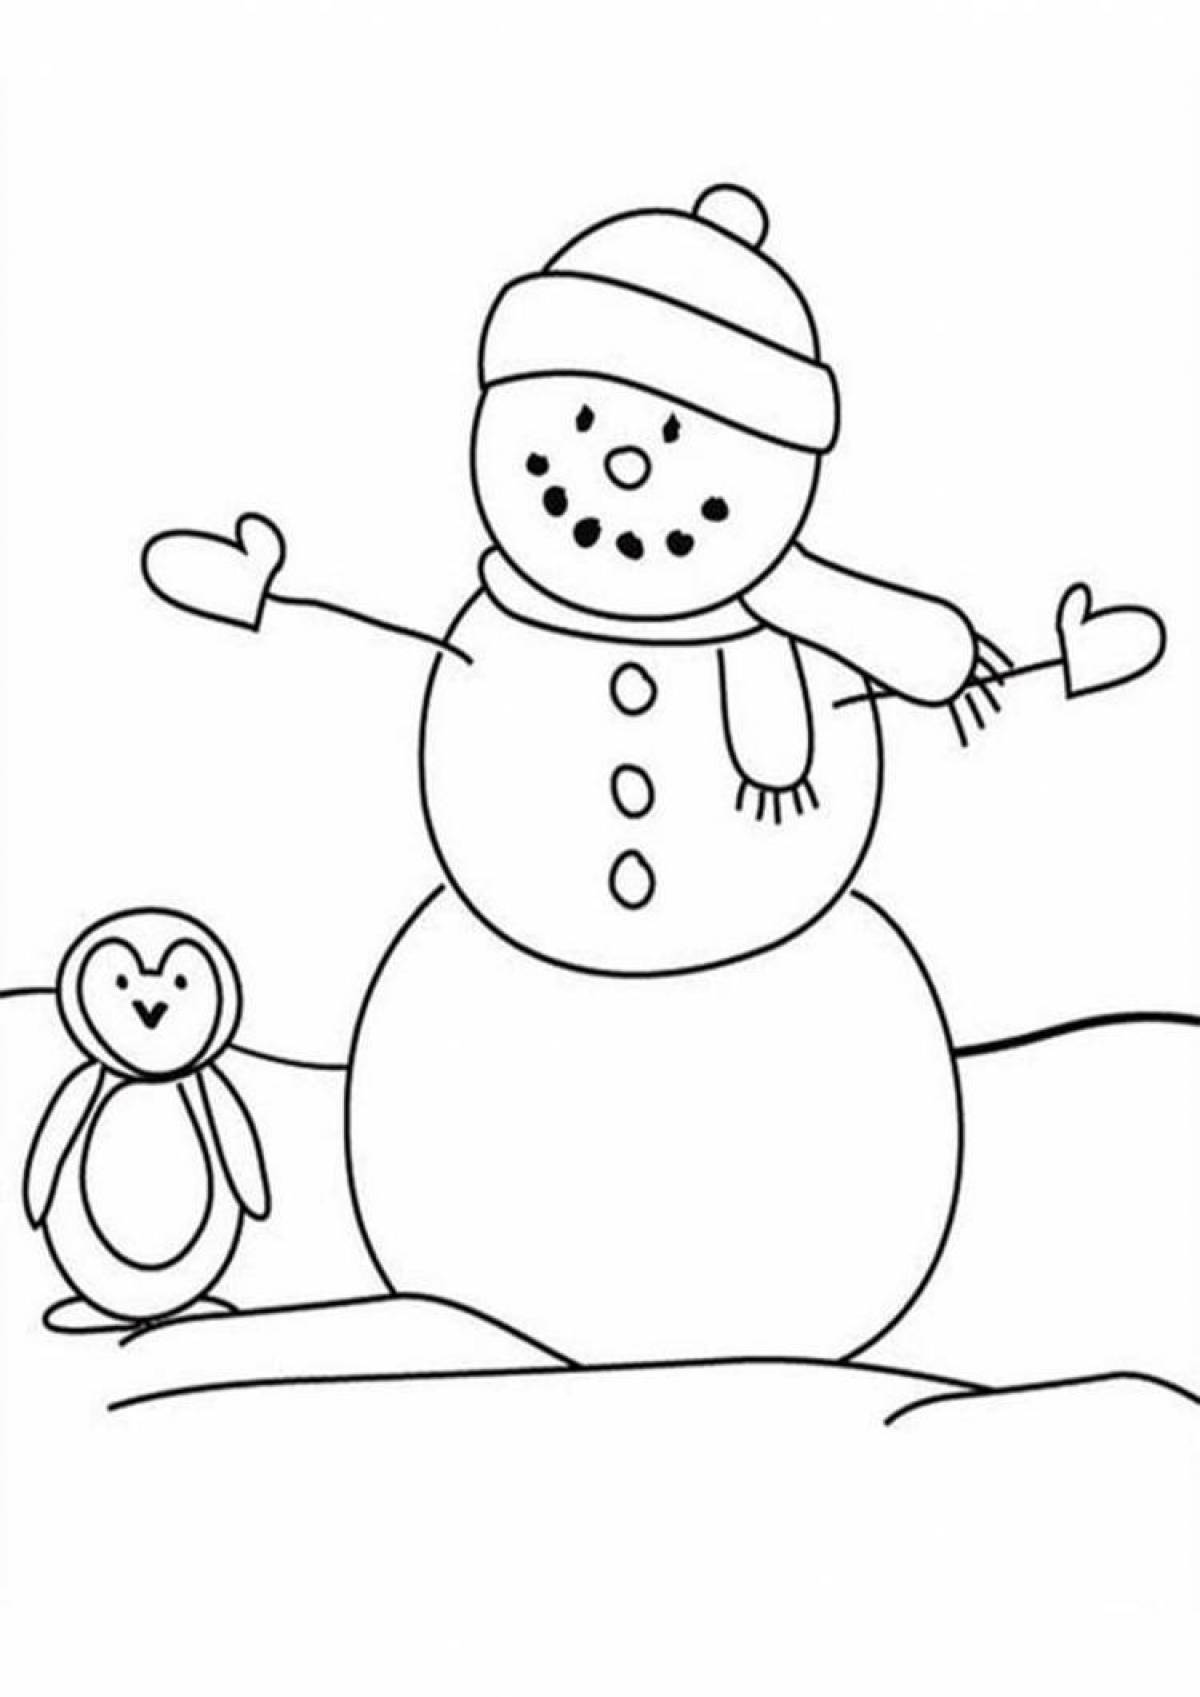 Amazing snowman coloring book for kids